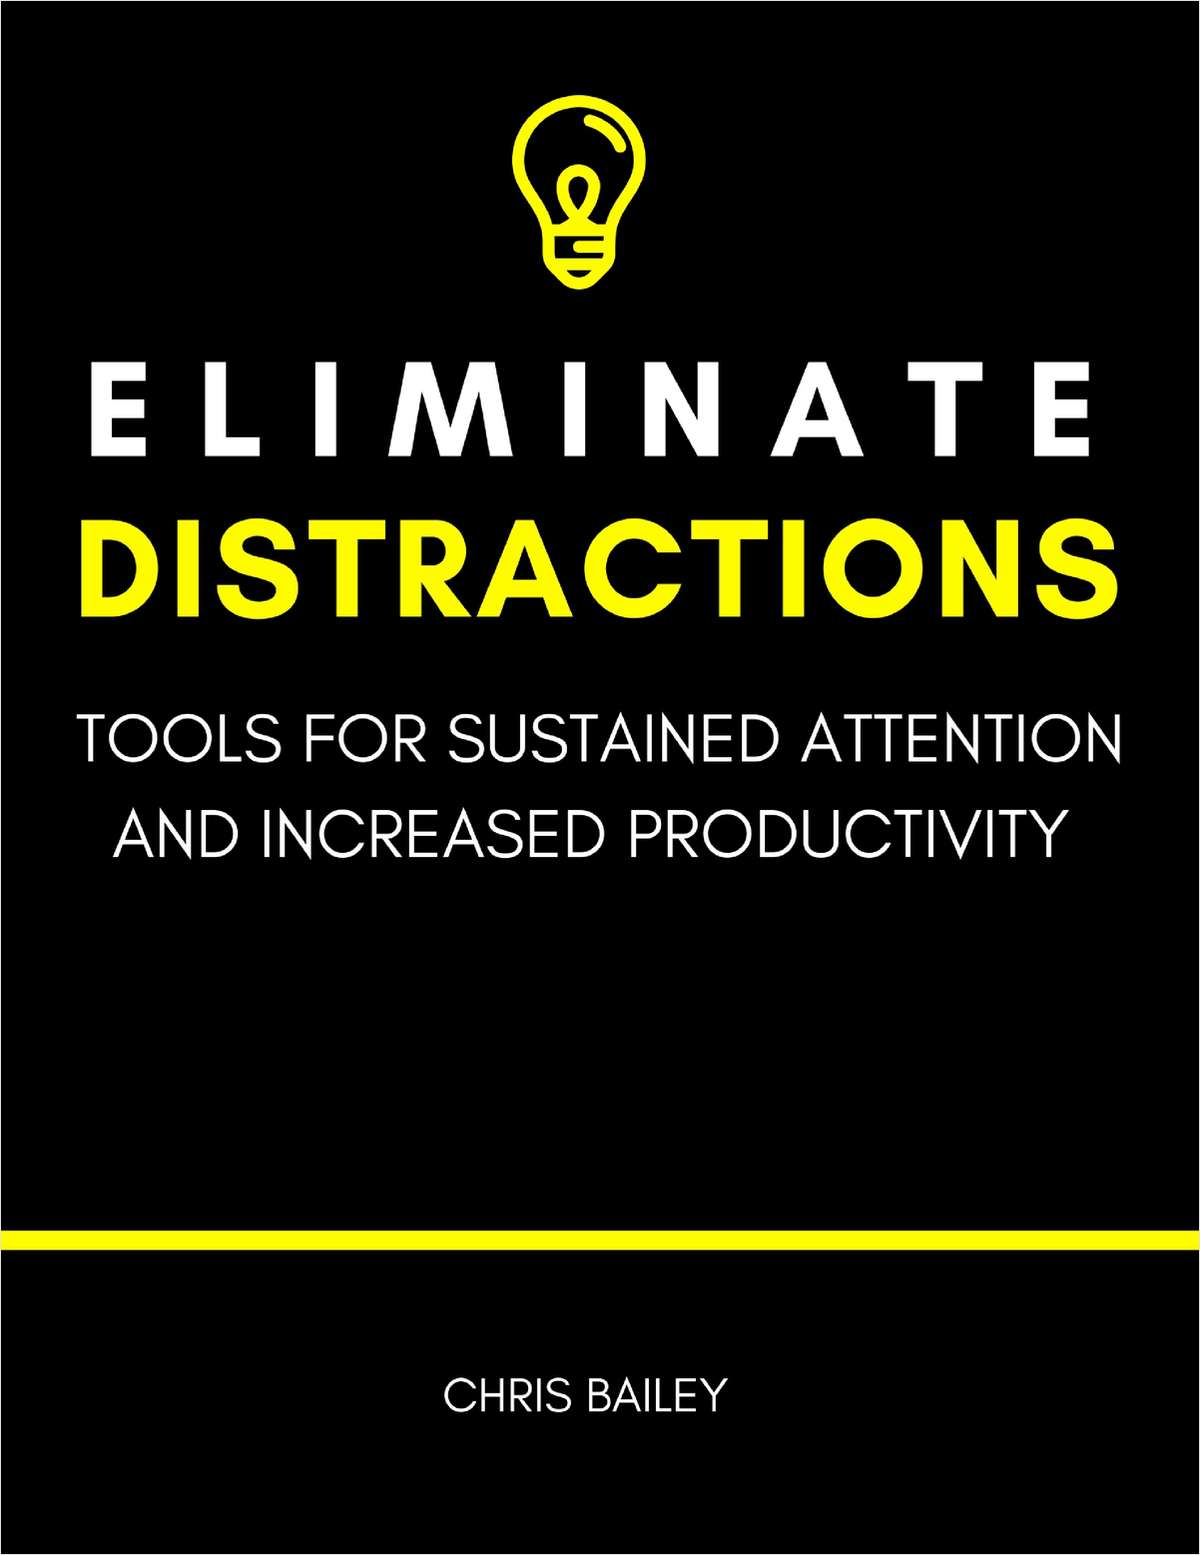 Eliminate Distractions - Tools for Sustained Attention and Increased Productivity